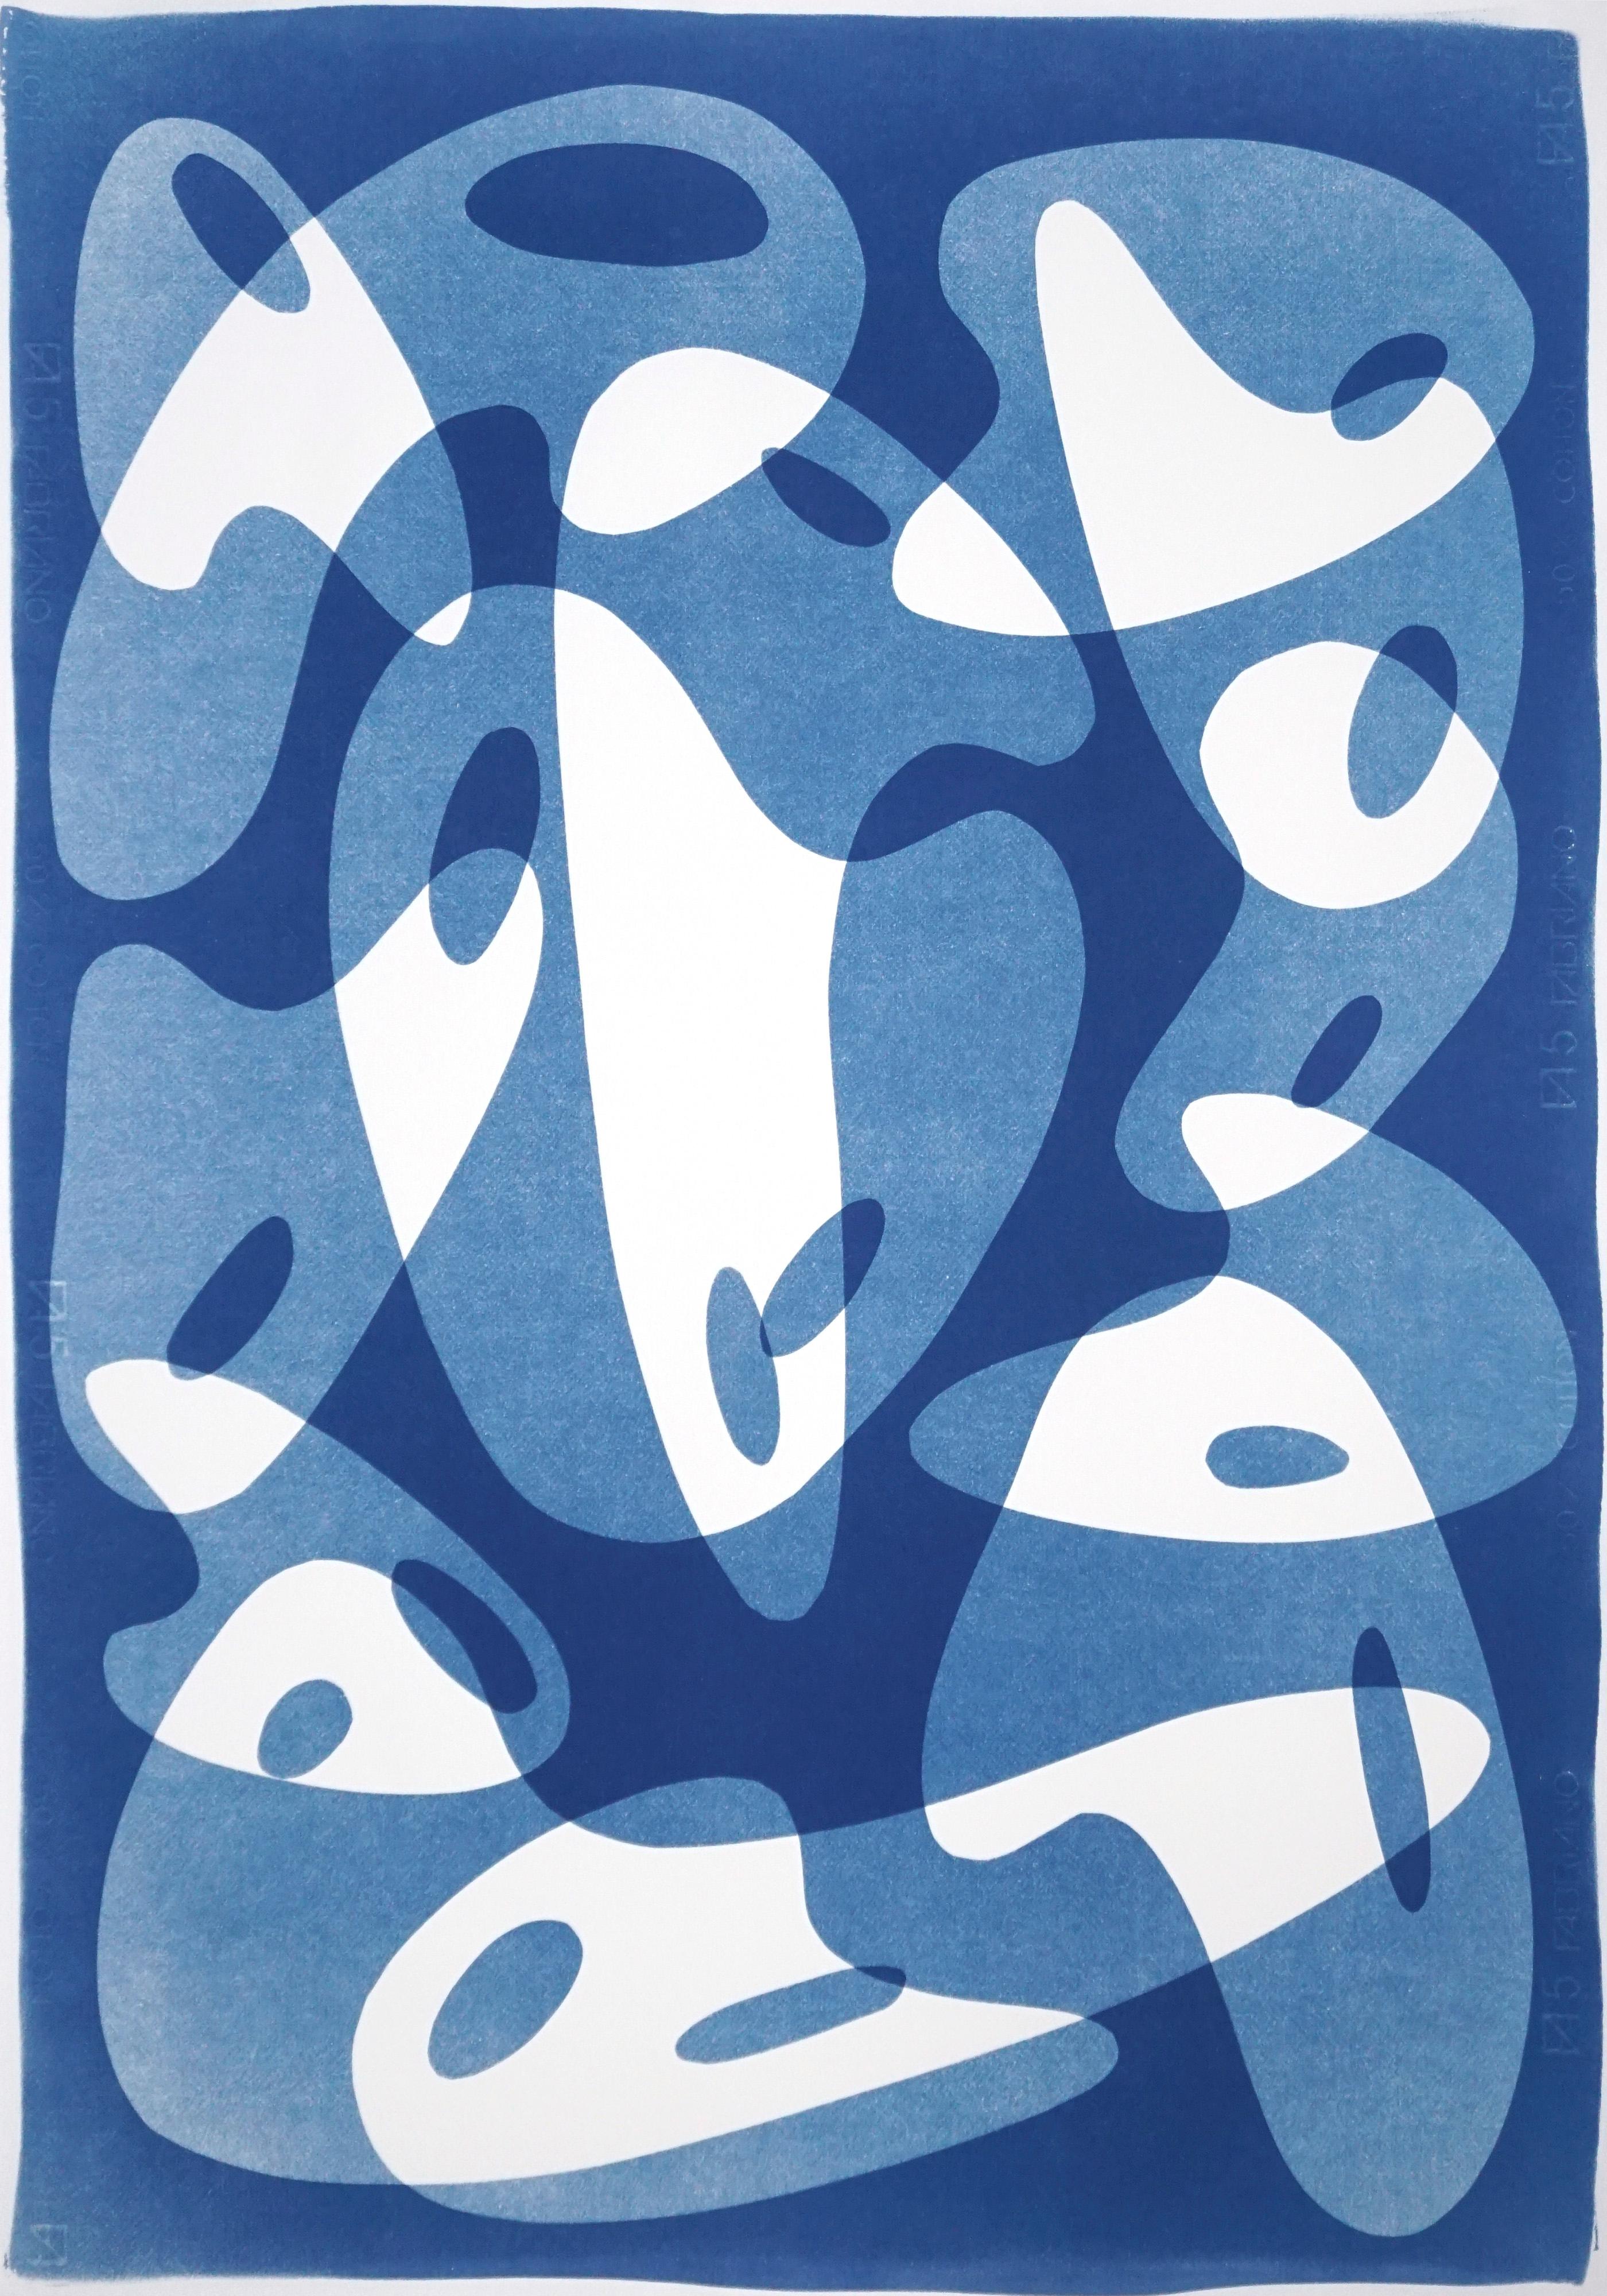 Cool Palette Curves, Handmade Cyanotype Monotype, Watercolor Paper, Blue, White